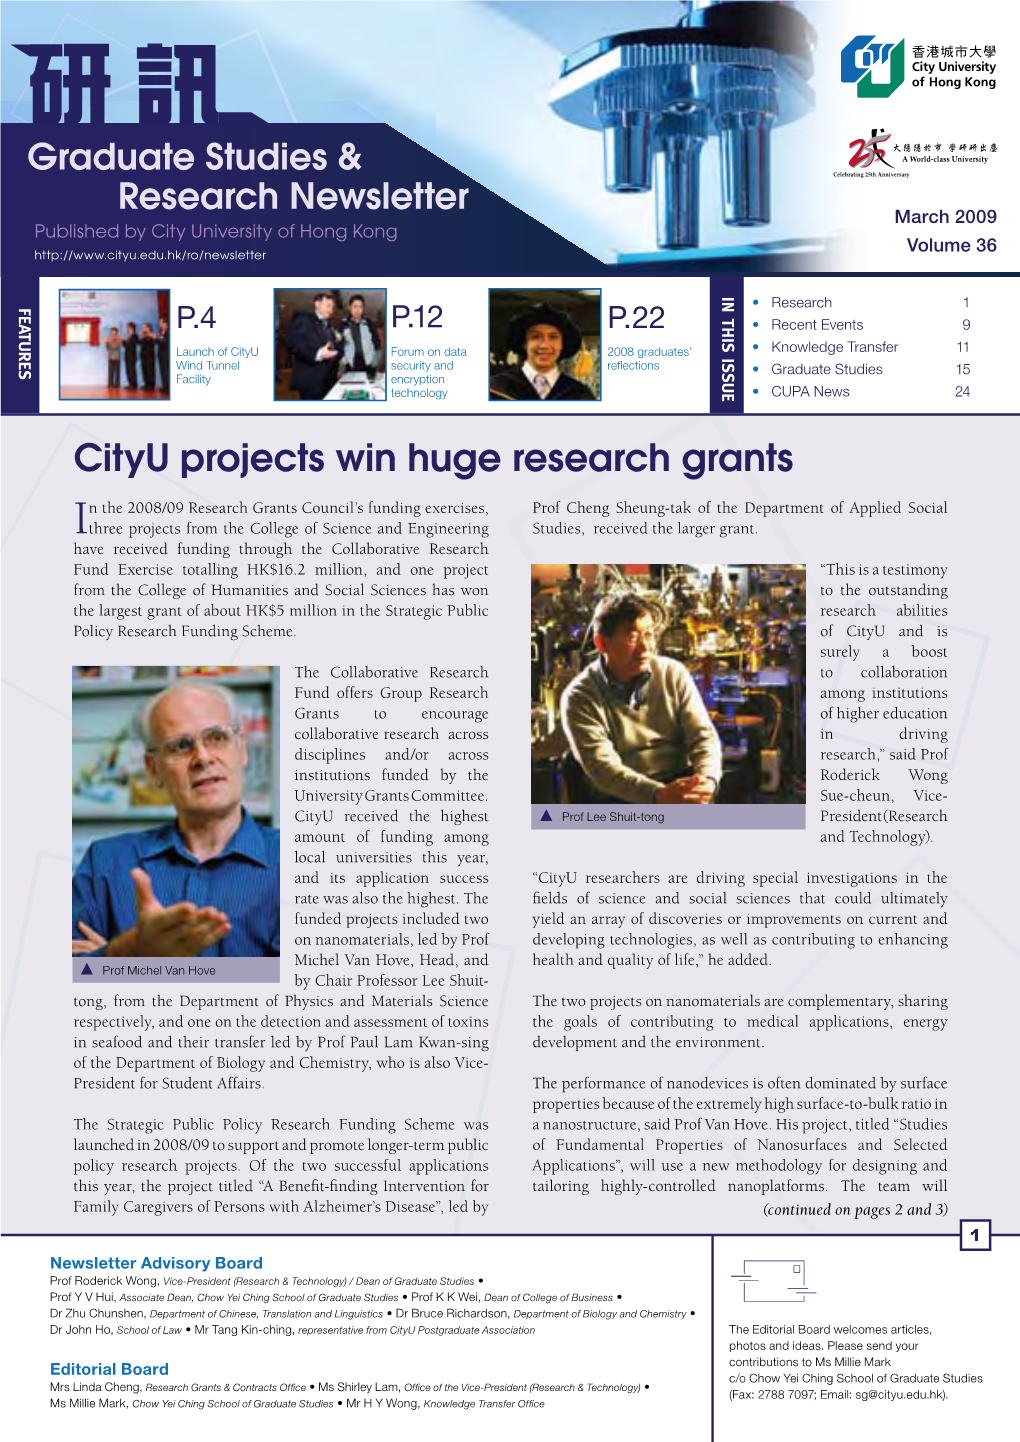 Cityu Projects Win Huge Research Grants